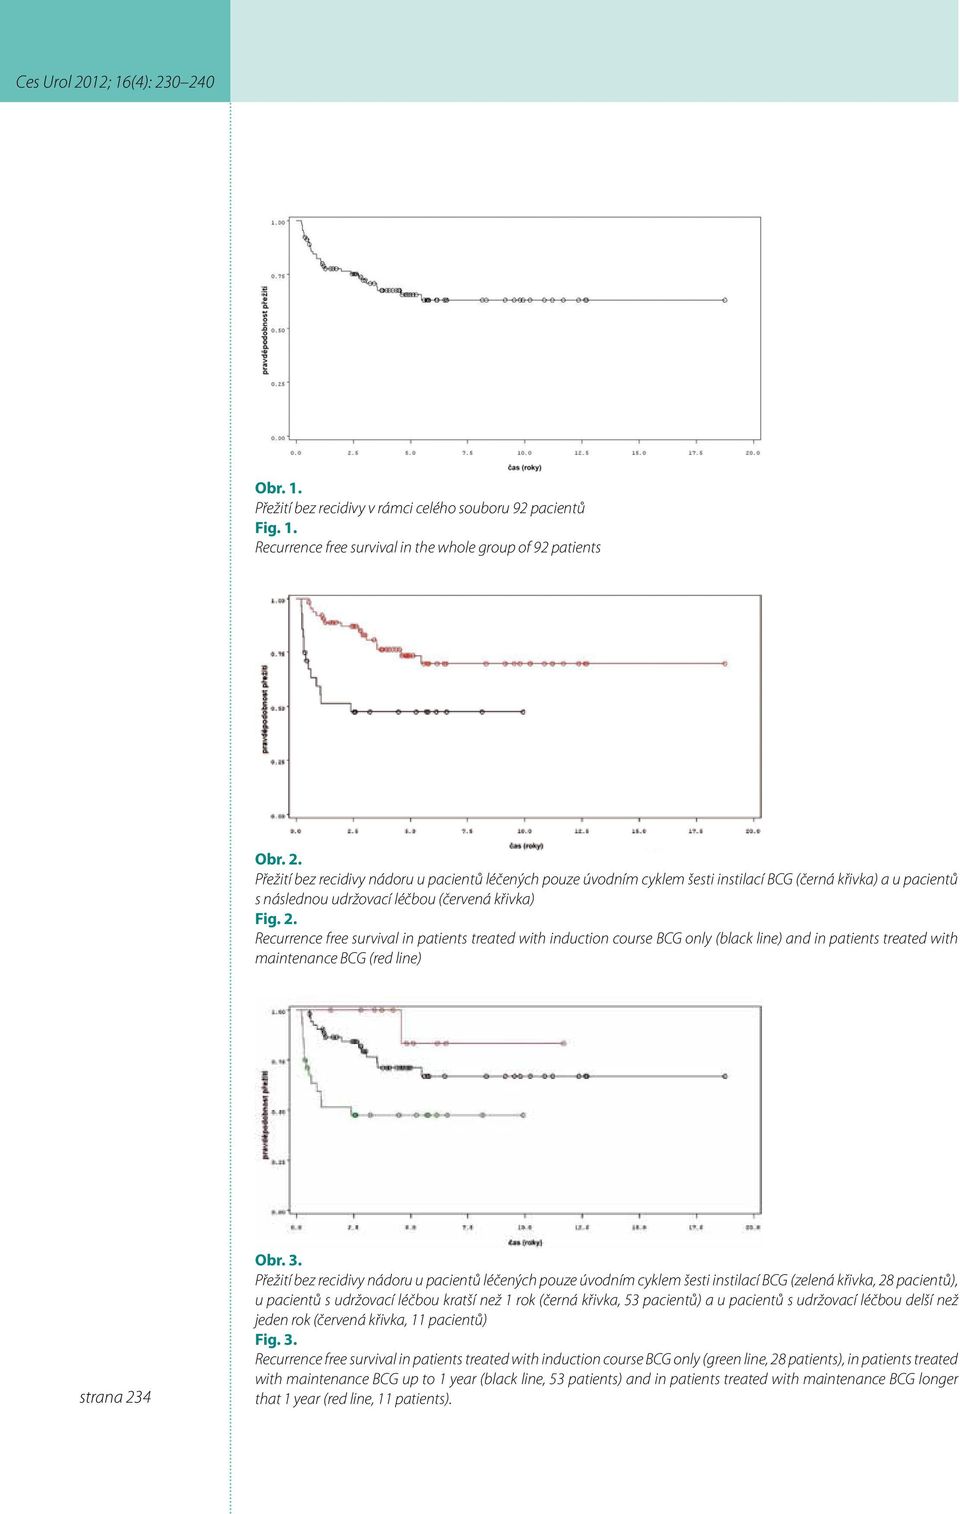 Recurrence free survival in patients treated with induction course BCG only (black line) and in patients treated with maintenance BCG (red line) strana 234 Obr. 3.